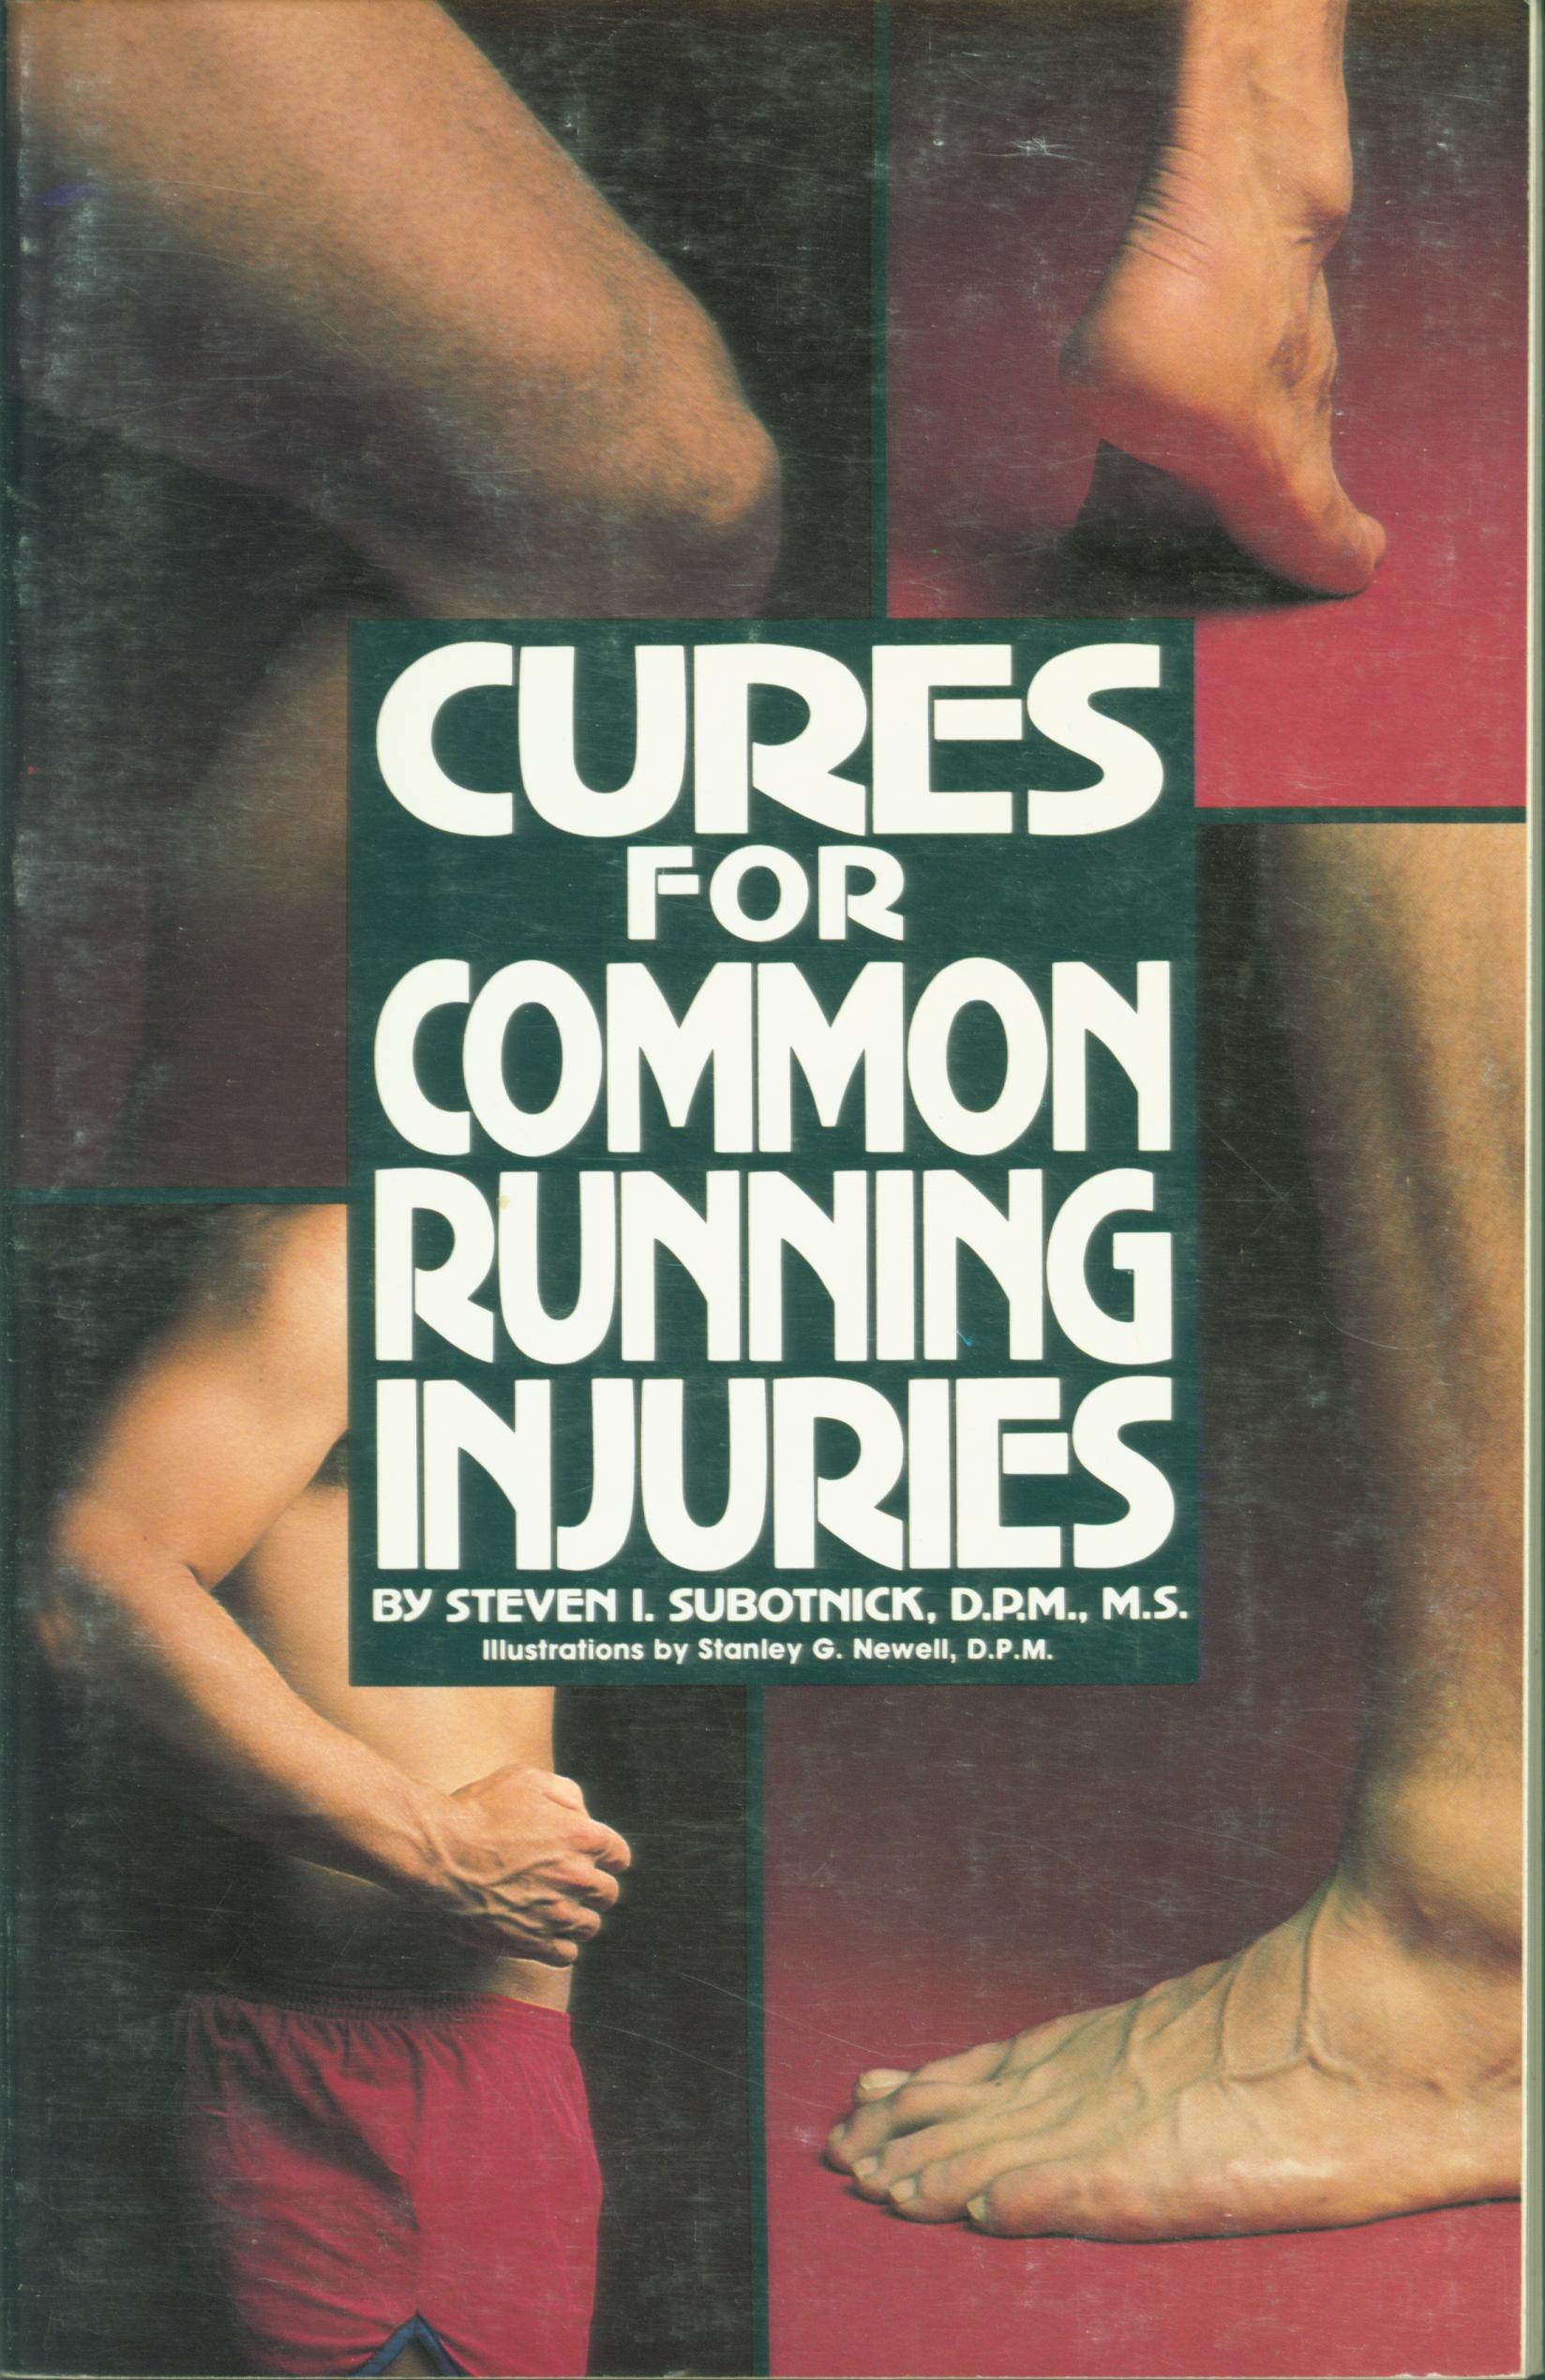 CURES FOR COMMON RUNNING INJURIES. 